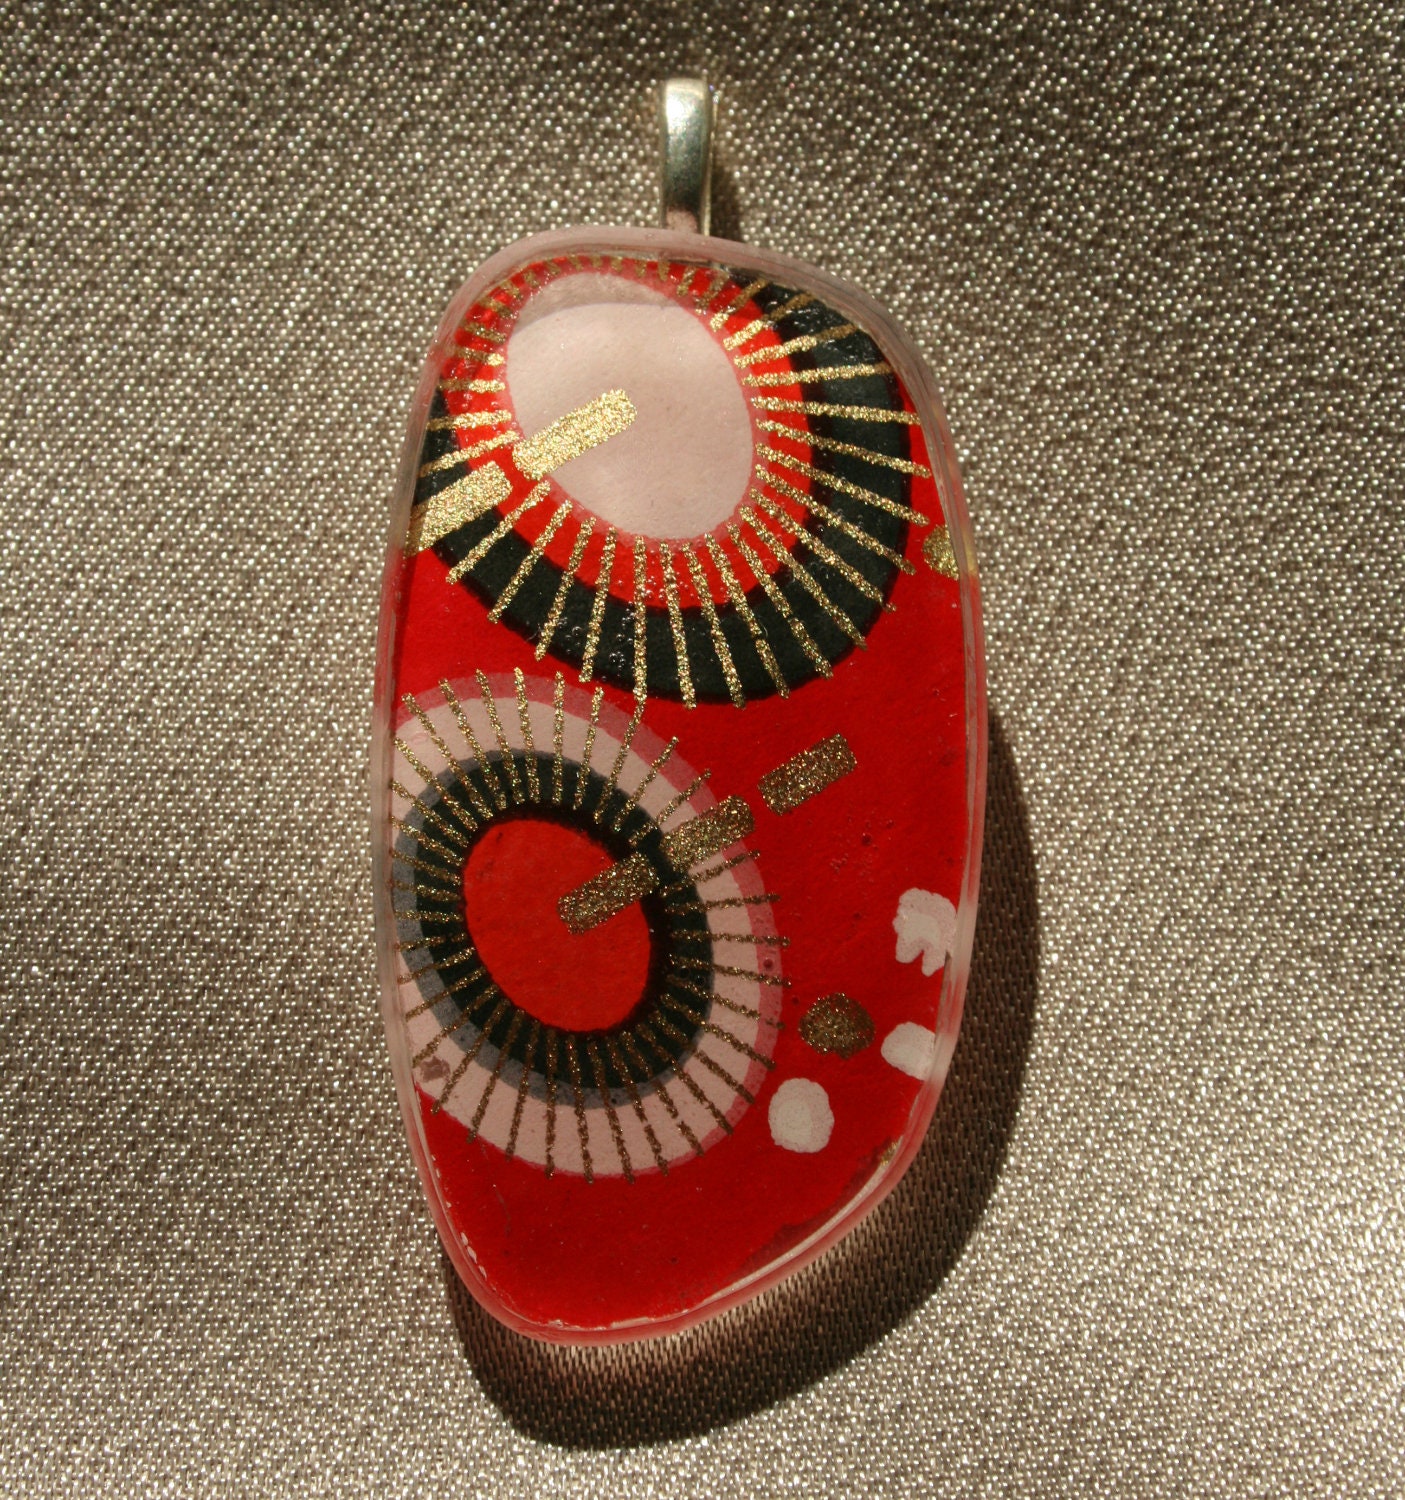 Recycled Eyeglass Lens Pendant (with Chain)--Black and Pink Umbrellas on a Red Background